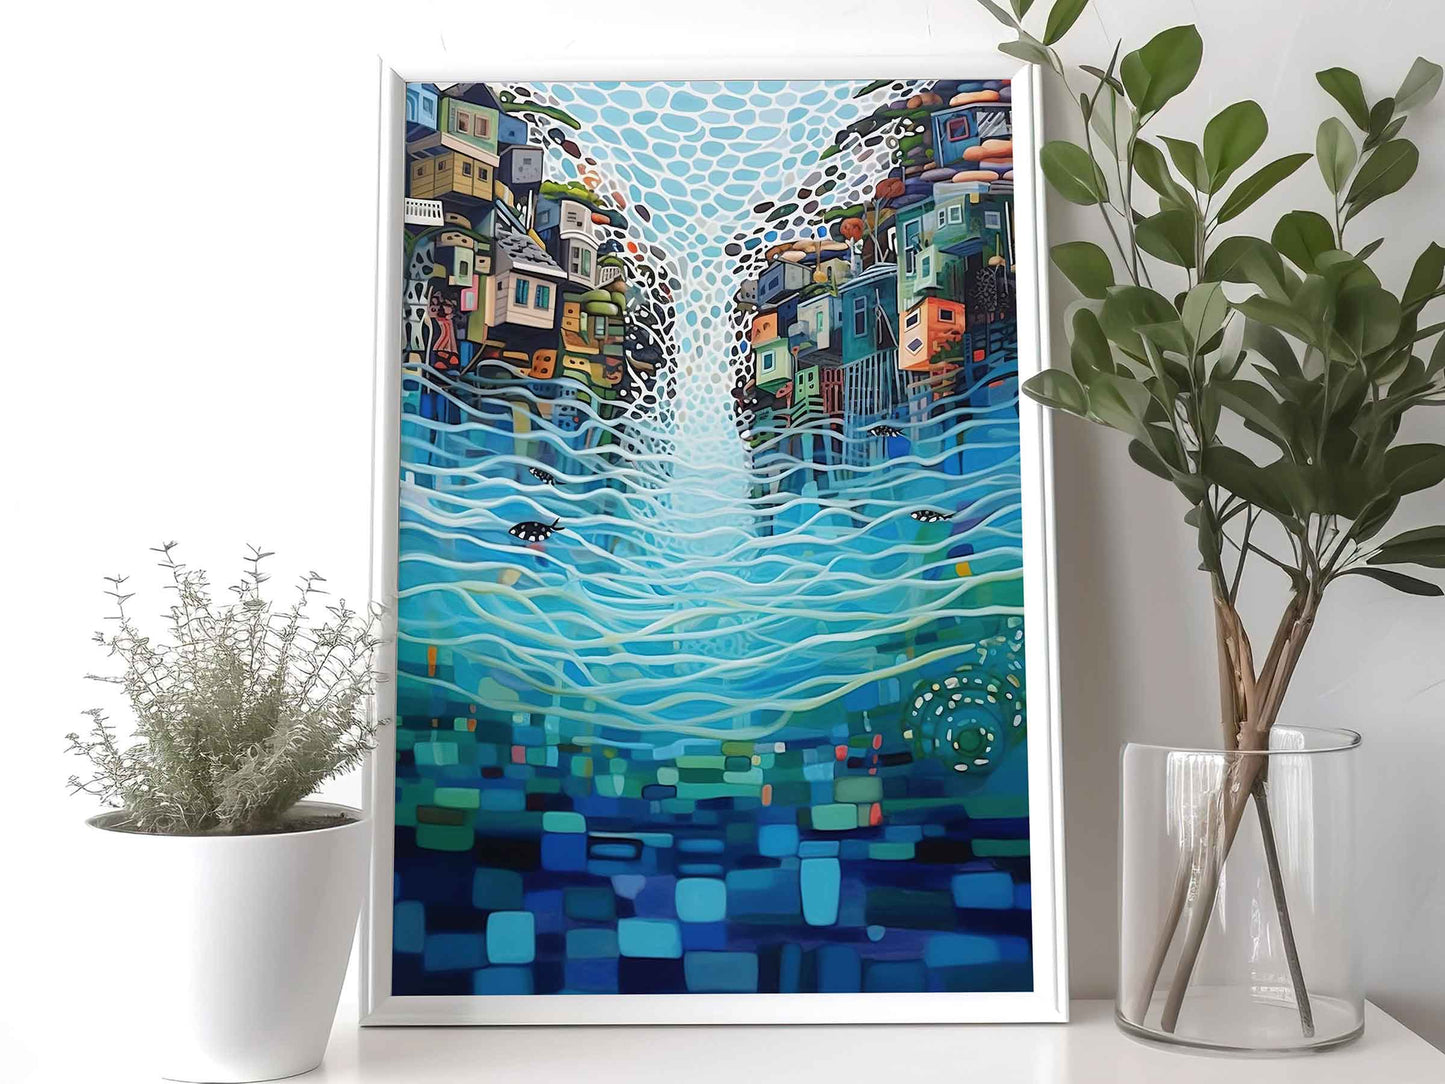 Framed Image of Abstract Swimming Pool and Water Reflections Wall Art Prints